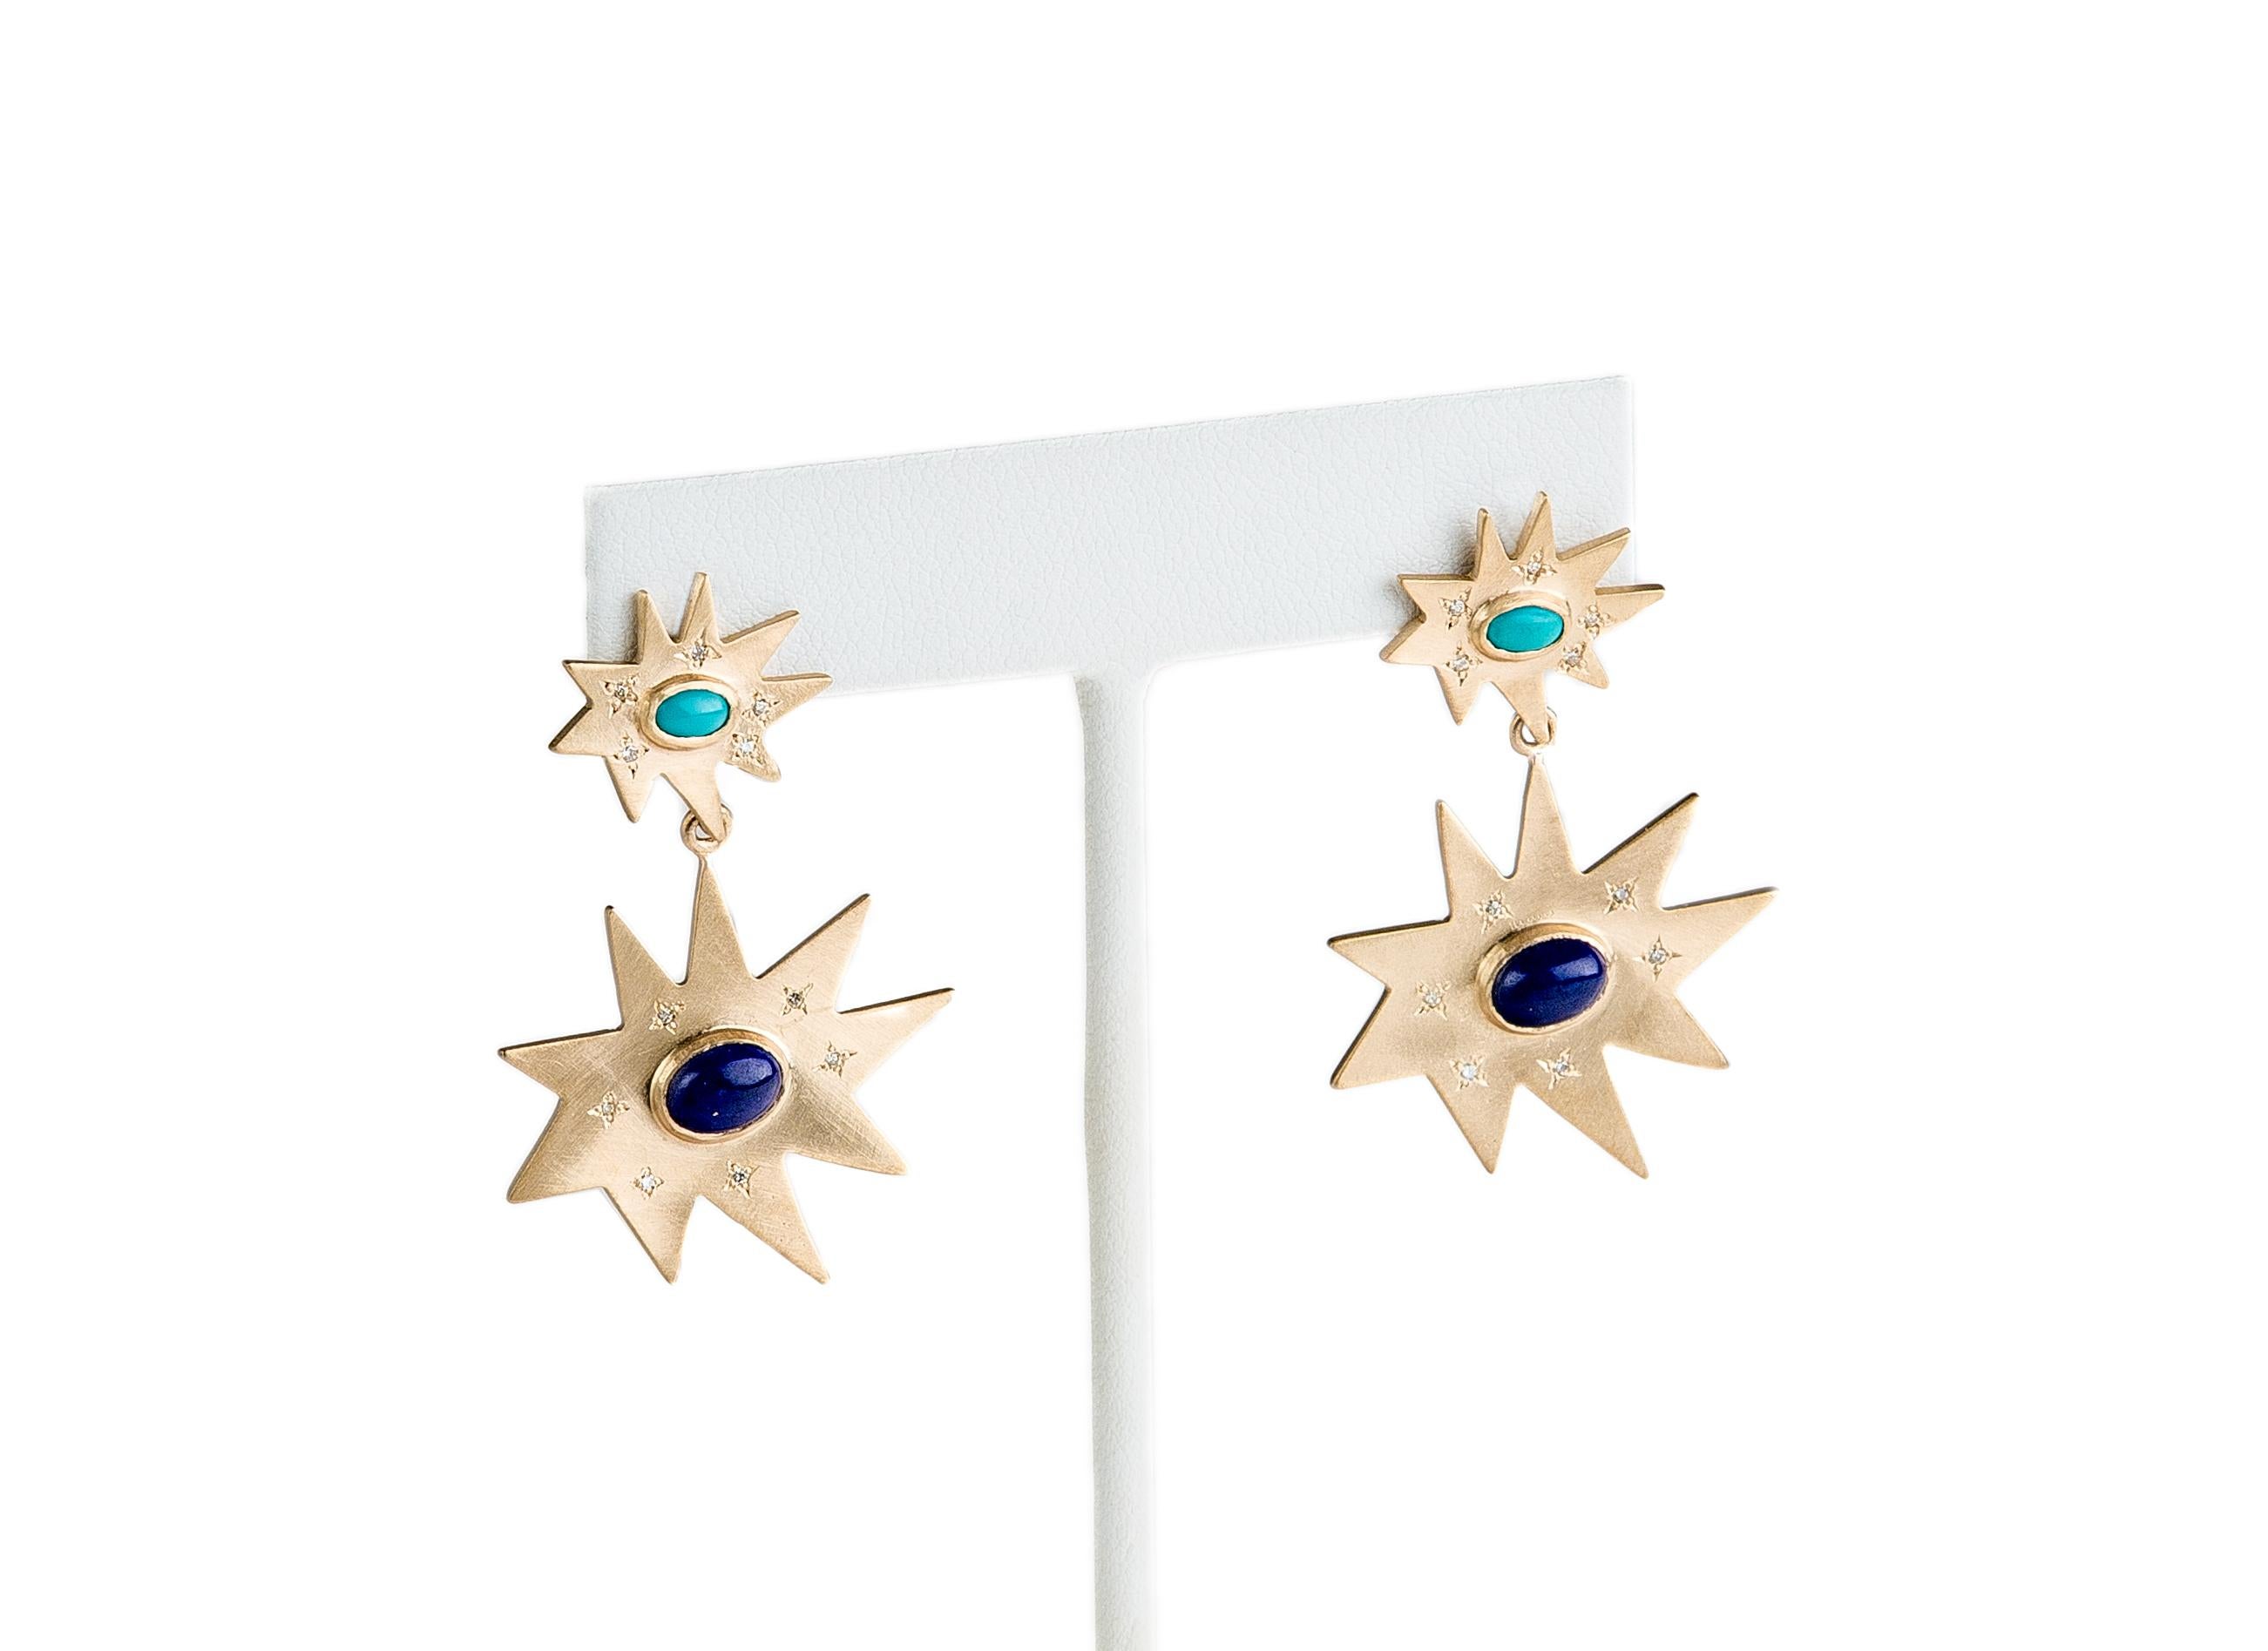 When gorgeous and elegant is what you want, these earrings fit the bill. Gorgeous 14k yellow gold Stellina and Stella double earrings feature our signature dusting of diamonds, and vibrant lapis lazuli and turquoise. On gold posts.
 
KAPOW! The